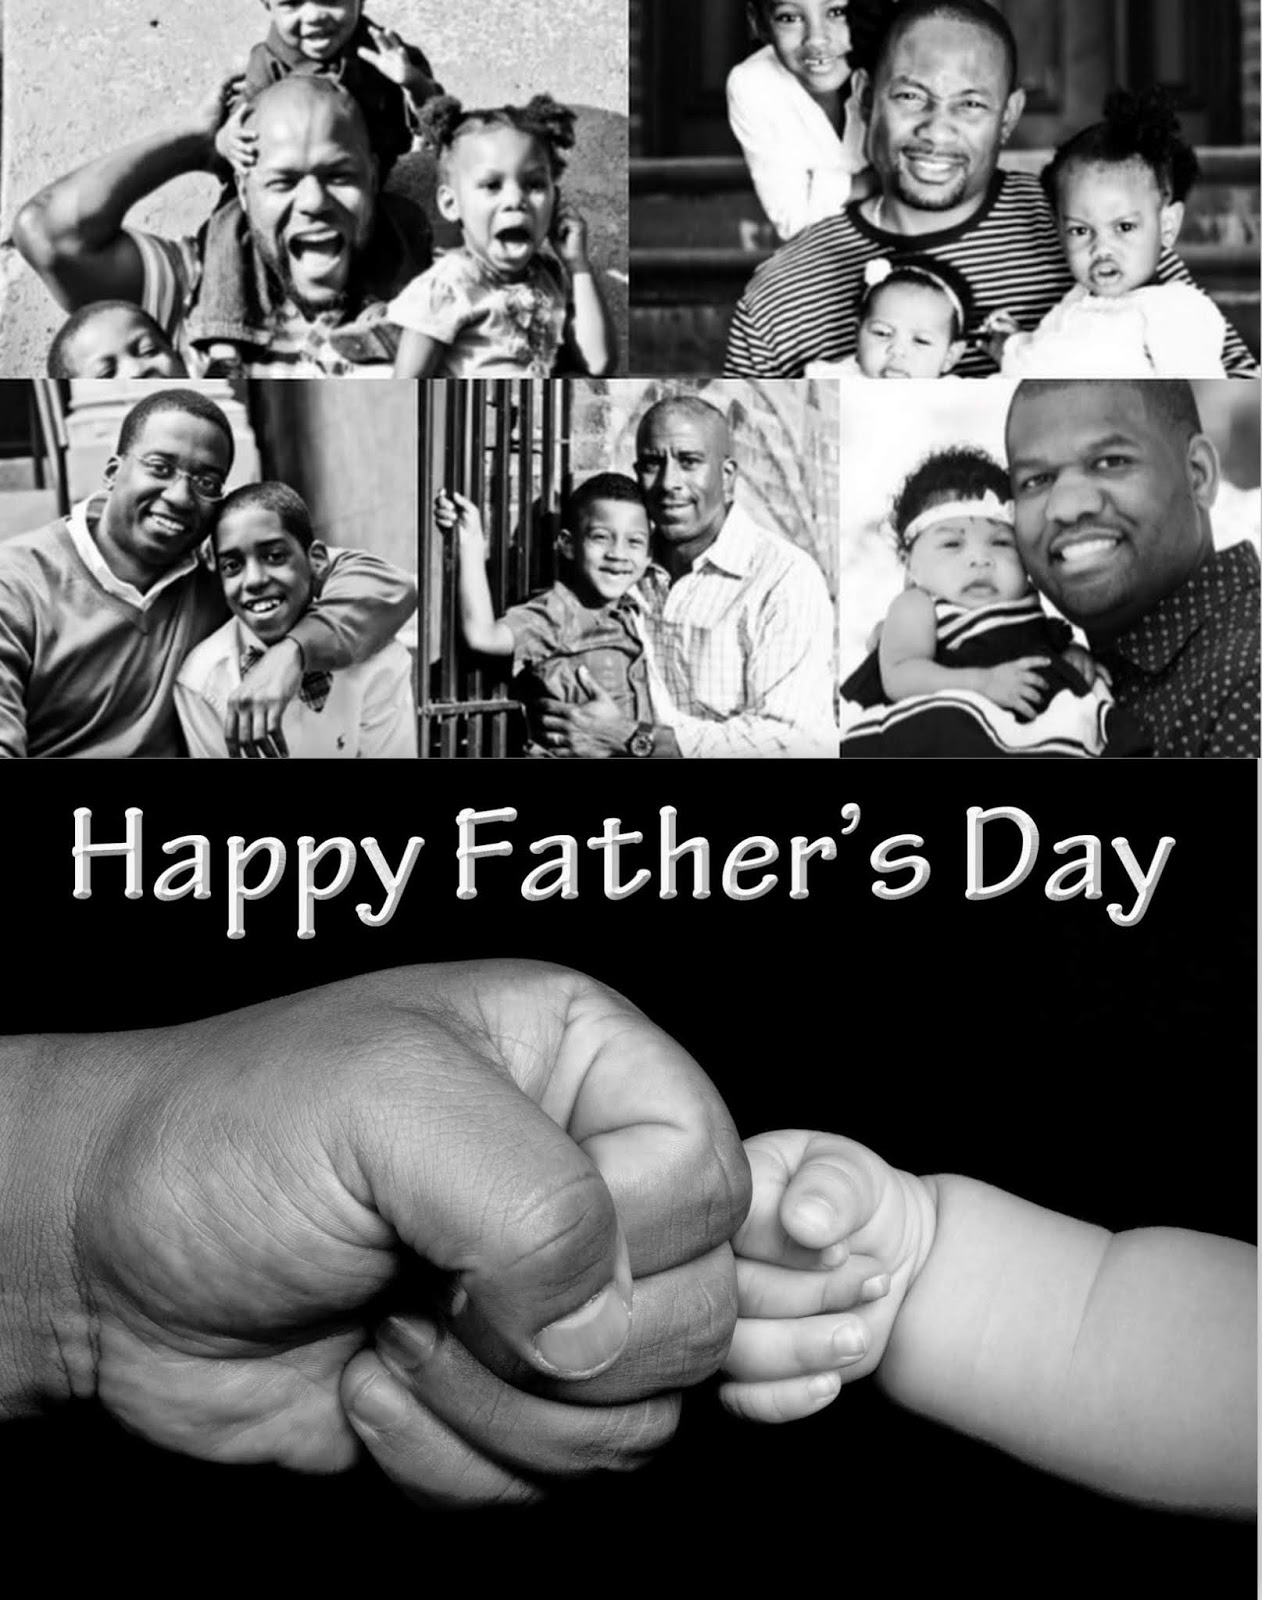 AFRICAN AMERICAN REPORTS Happy Father's Day, Black Fathers Matter